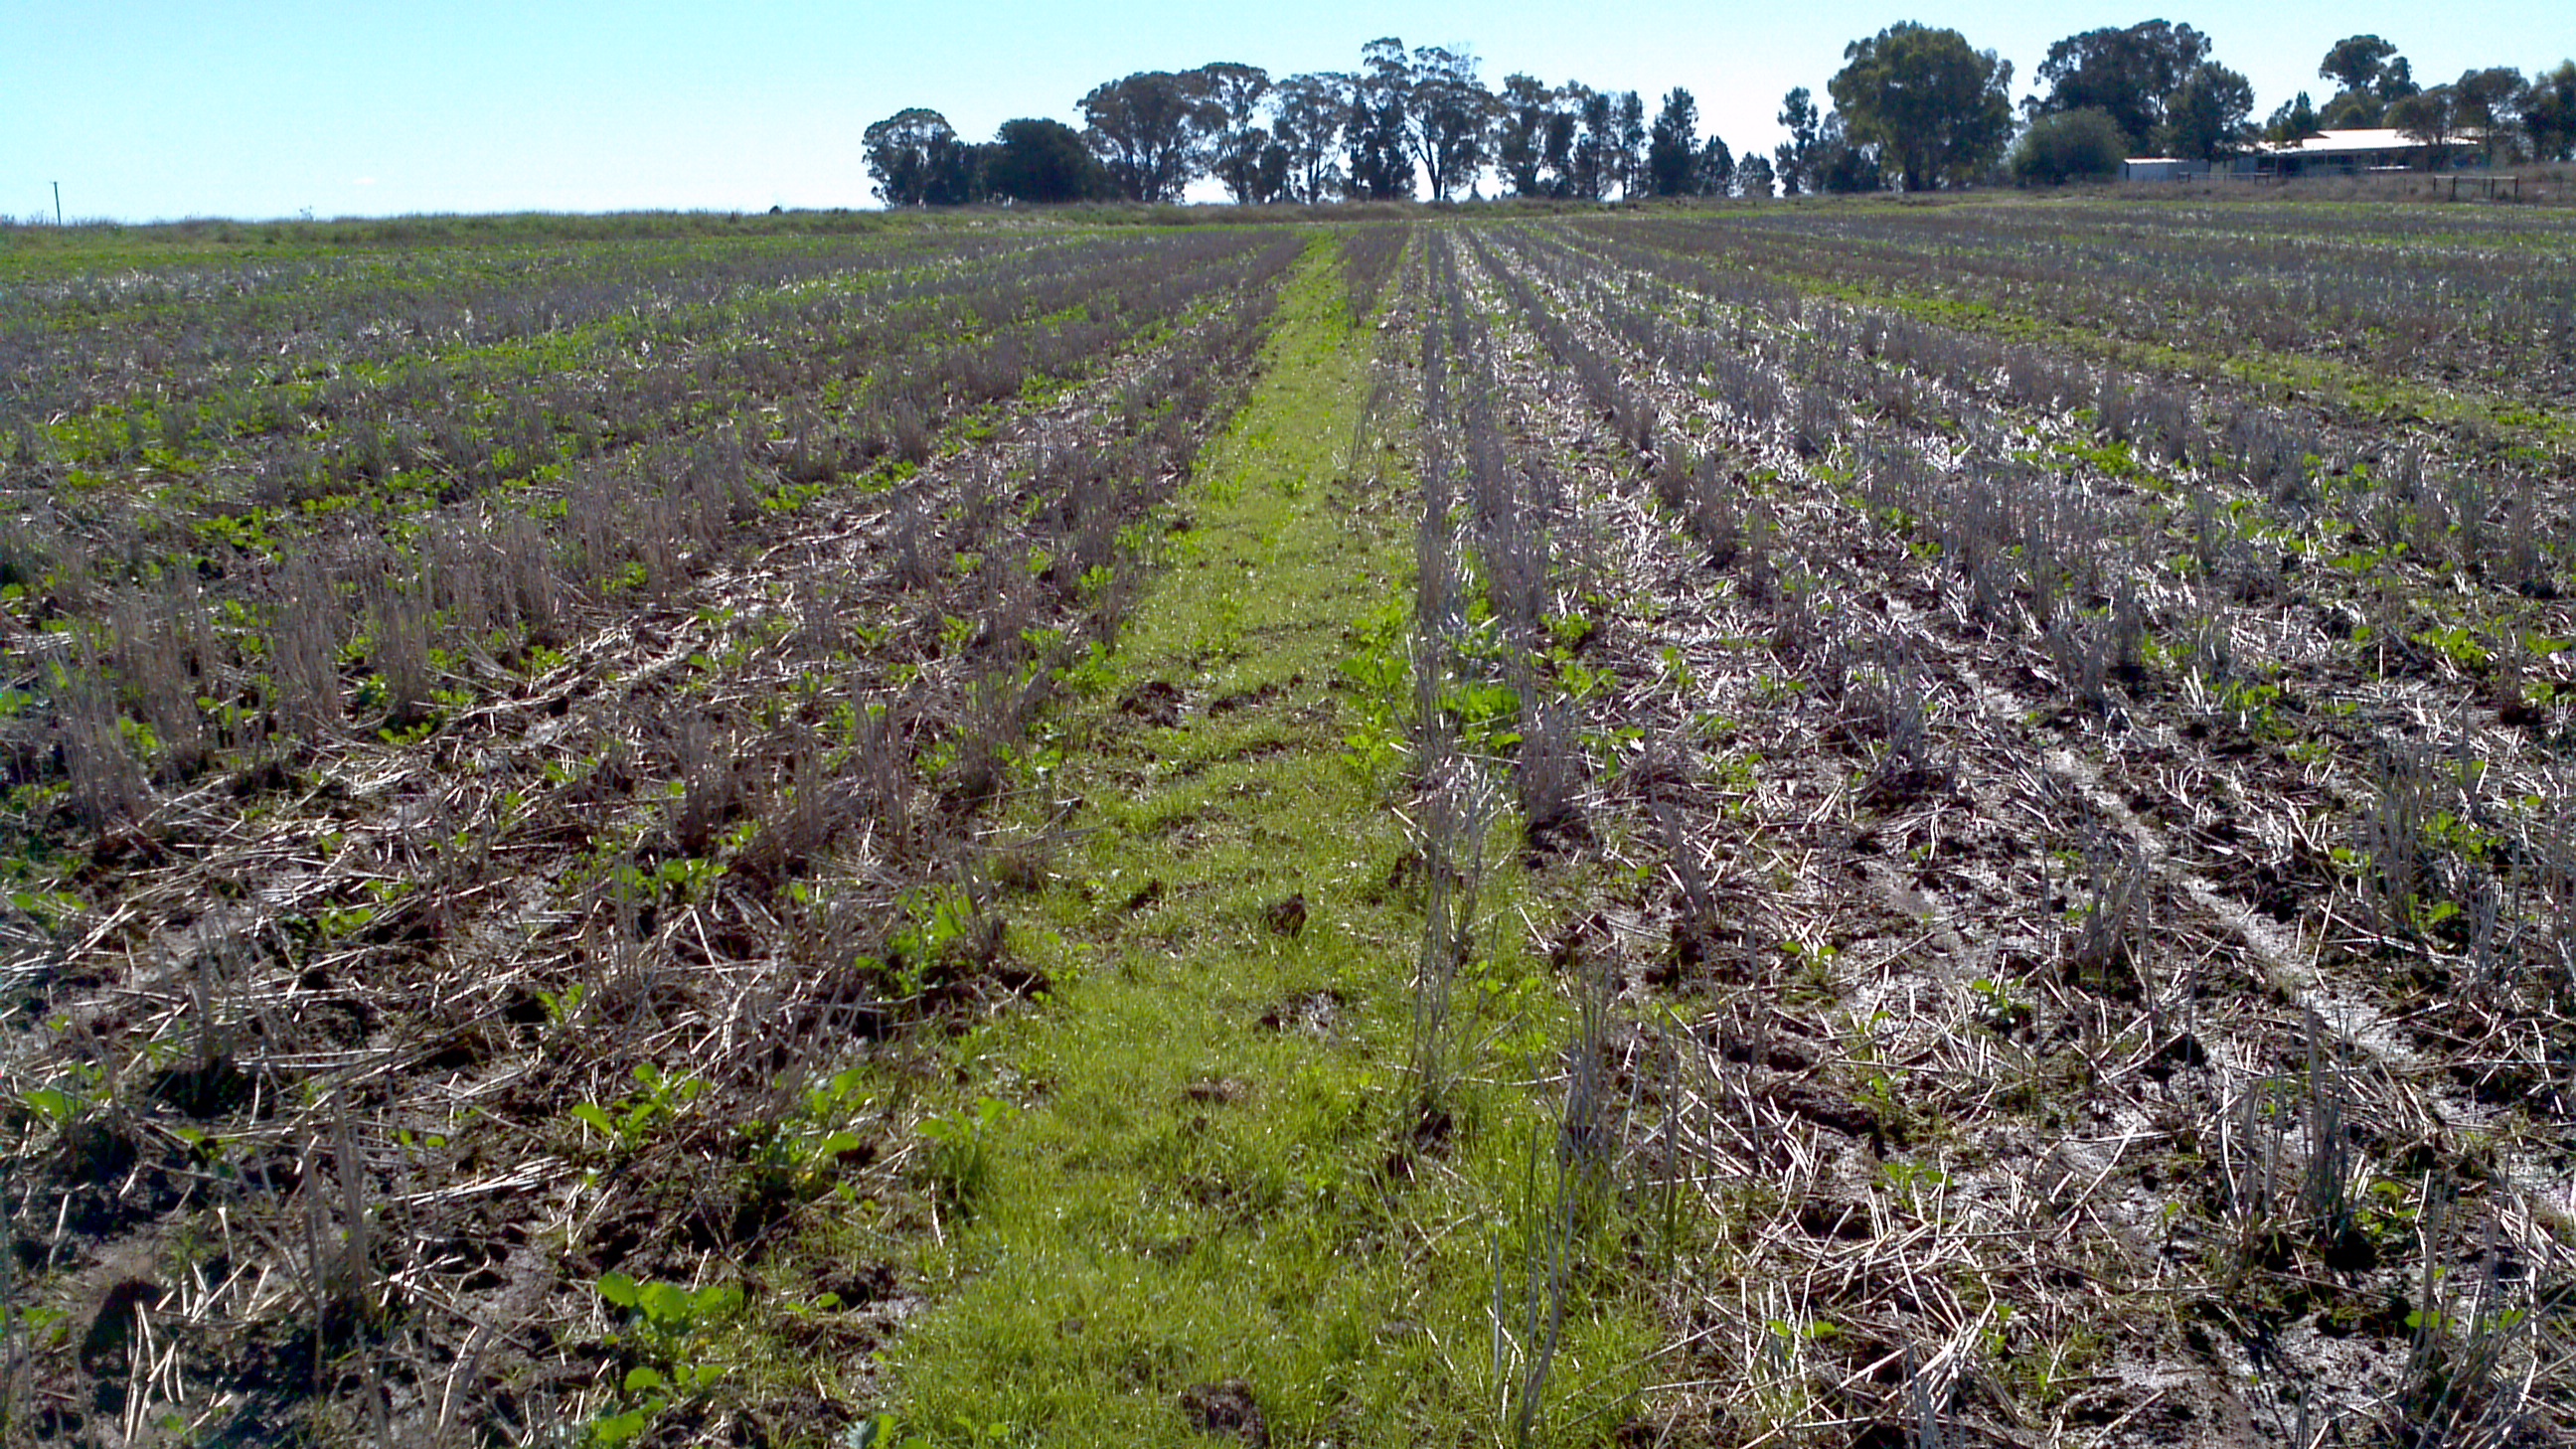 Figure 5:  Windrow burnt in early May in poor conditions did not kill the ryegrass weed seeds as seen in the emerging canola crop the following year.